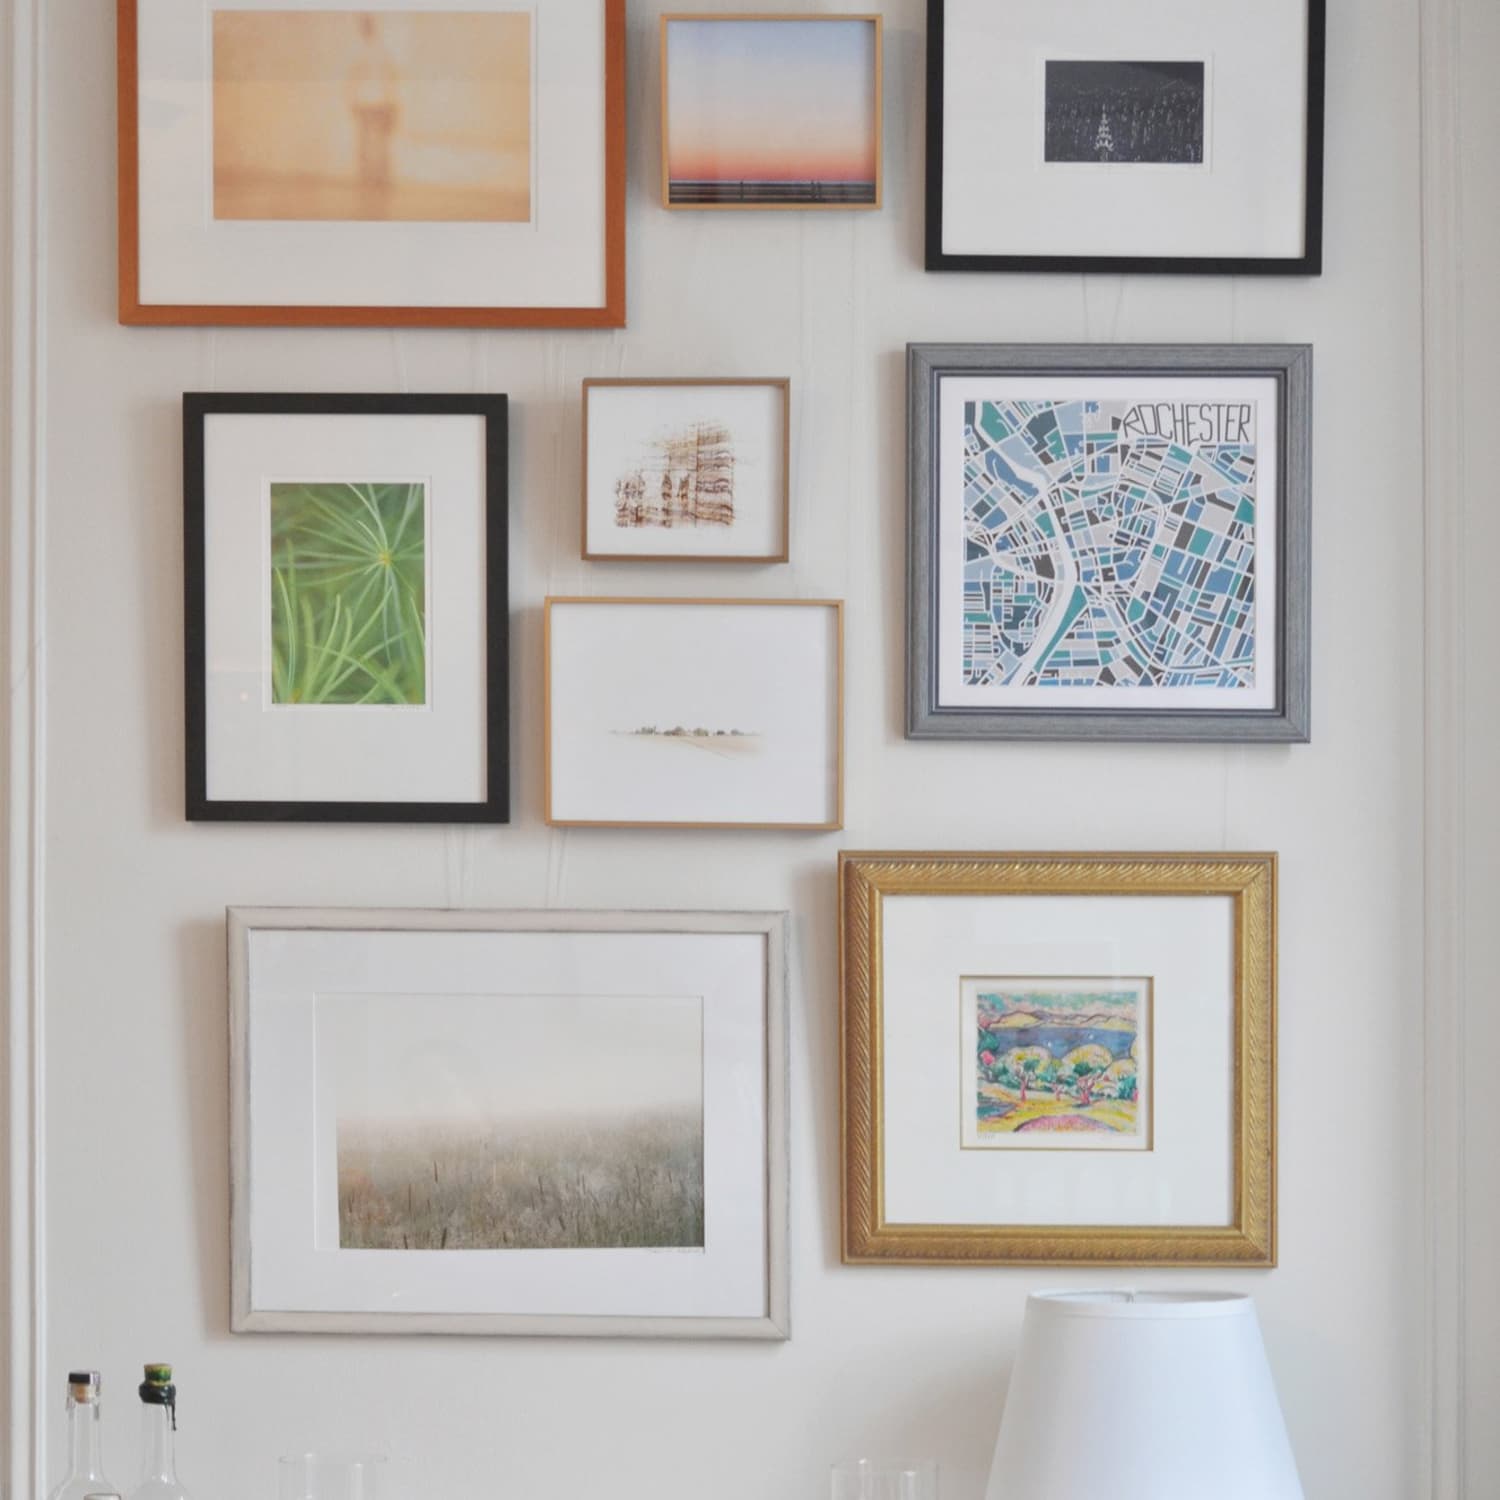 How to Frame Your Art on a Budget (Step-by-Step DIY Guide)